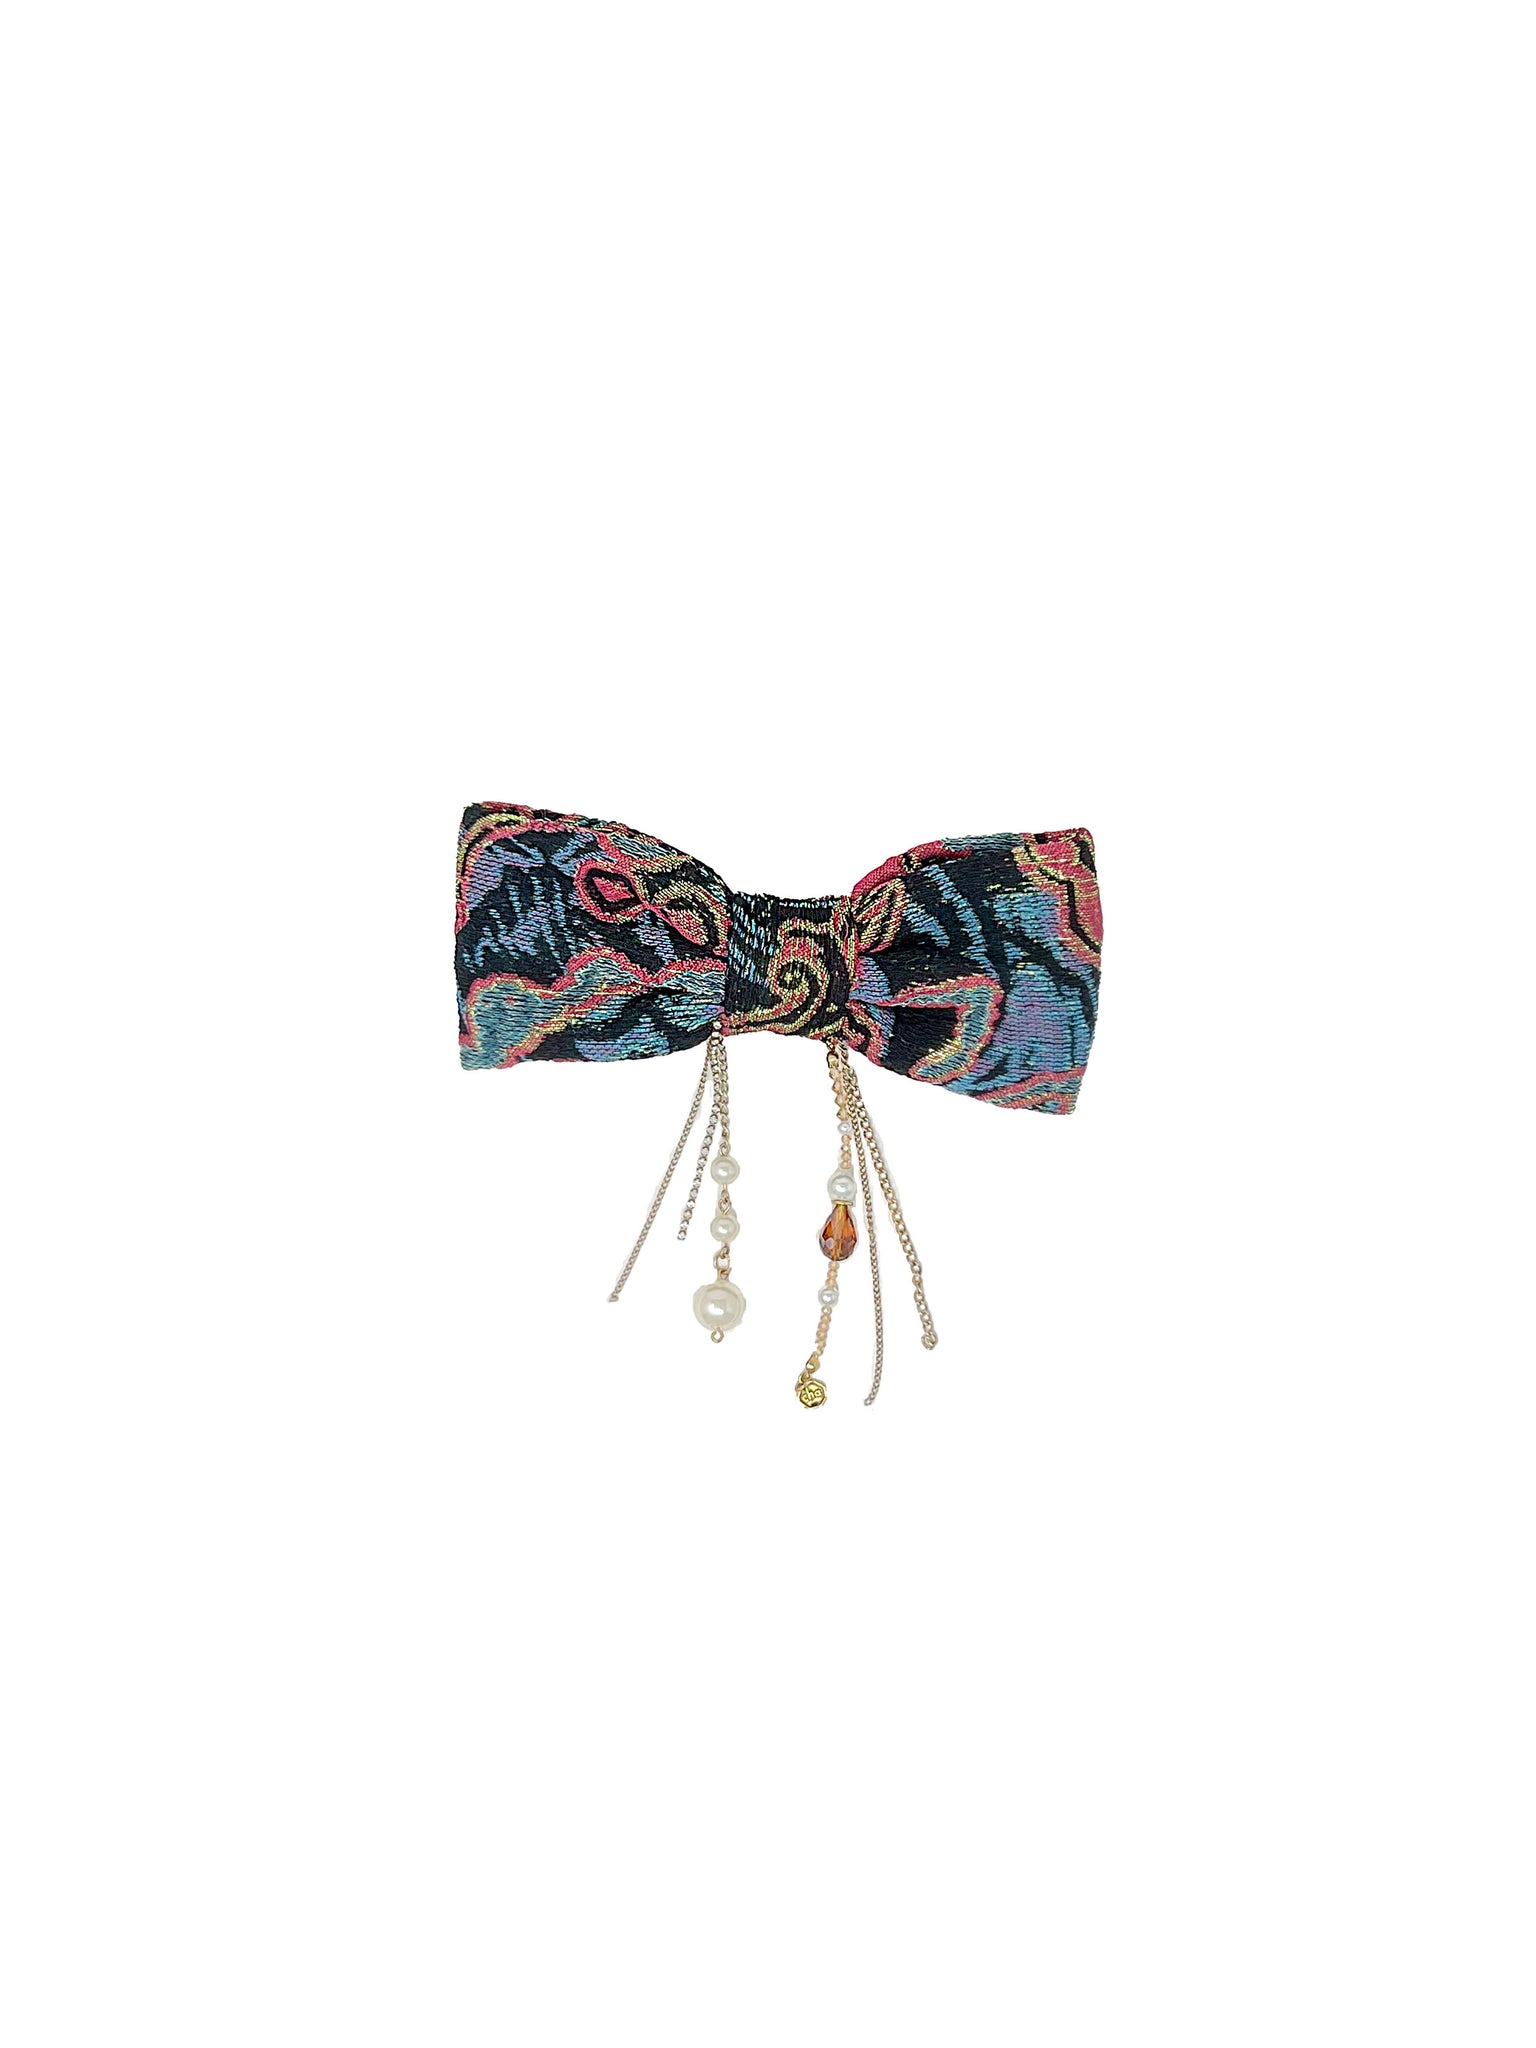 Light blue and fuxia brocade bow barrette with crystals